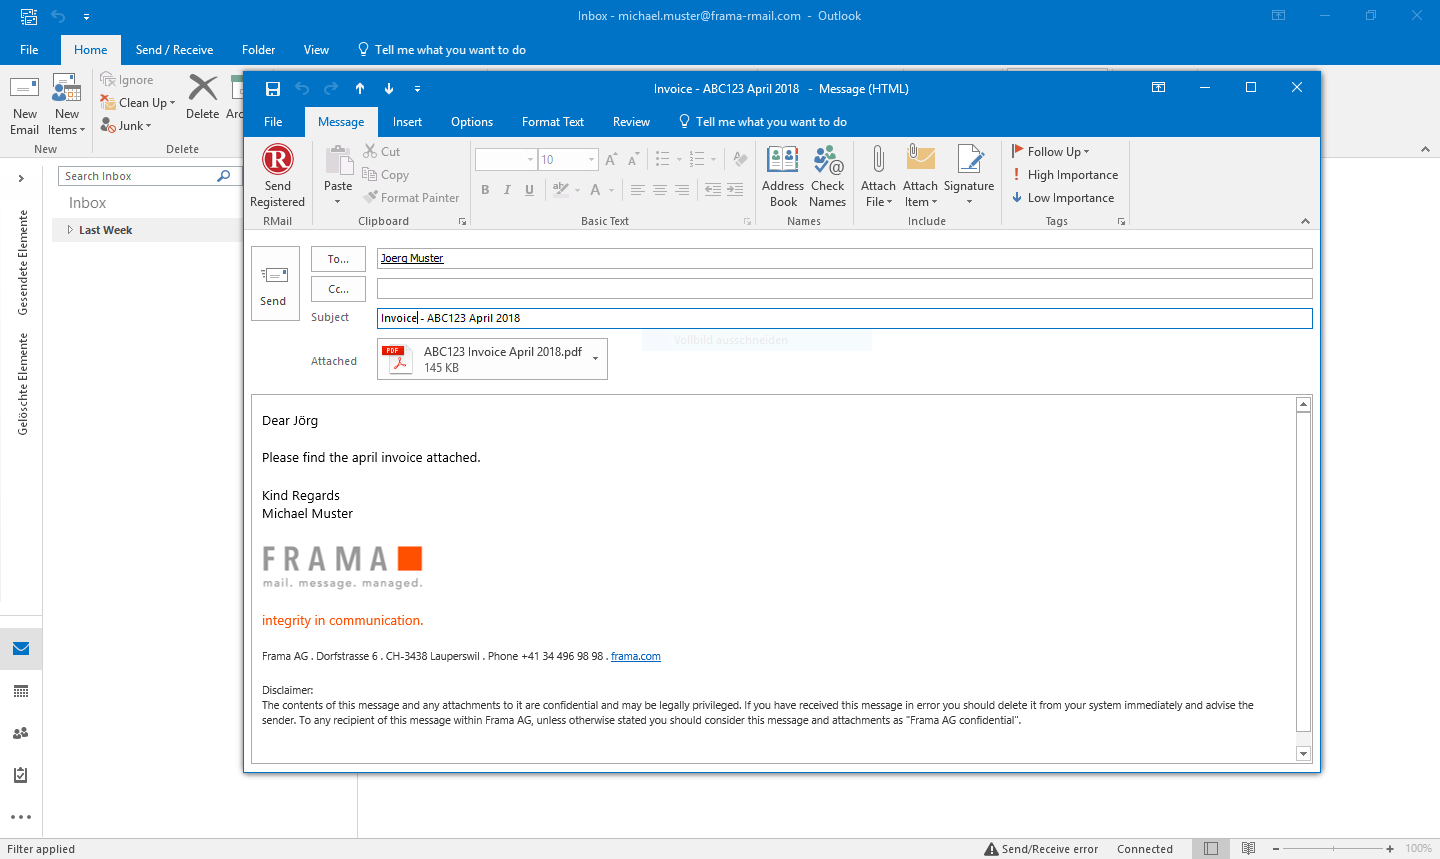 how to i find sent mail in outlook